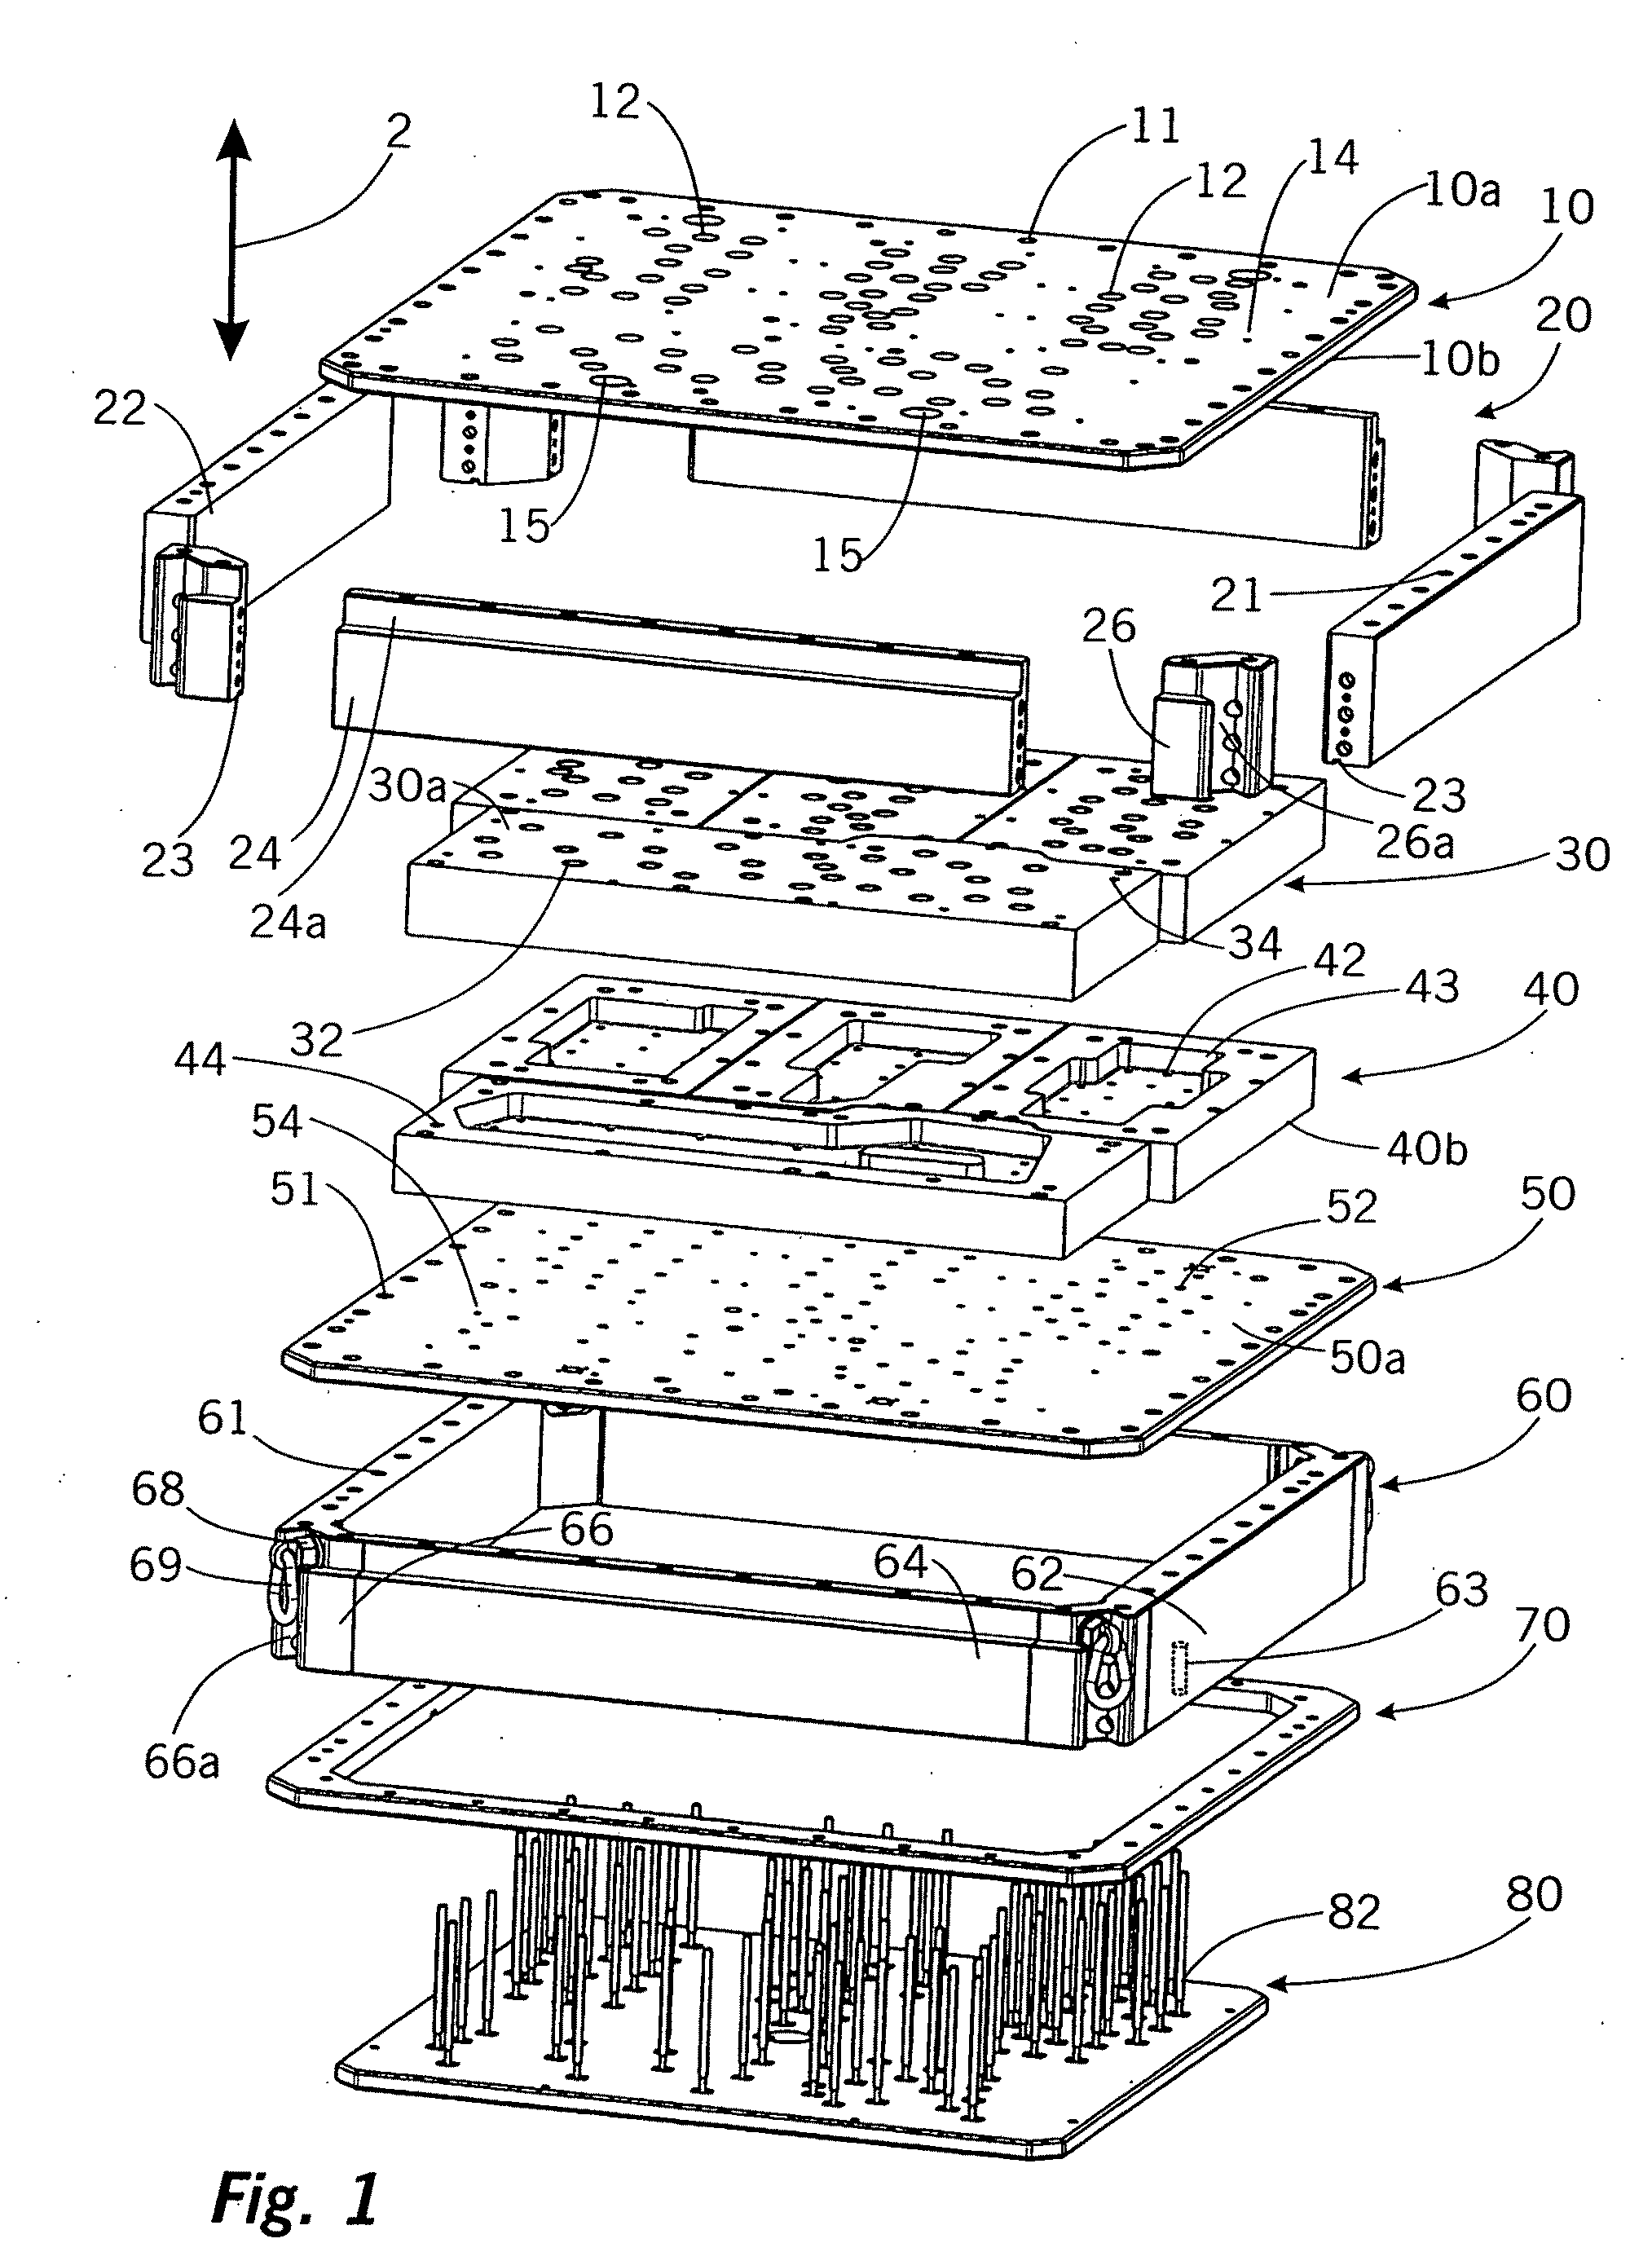 Casting tool and core-making machine